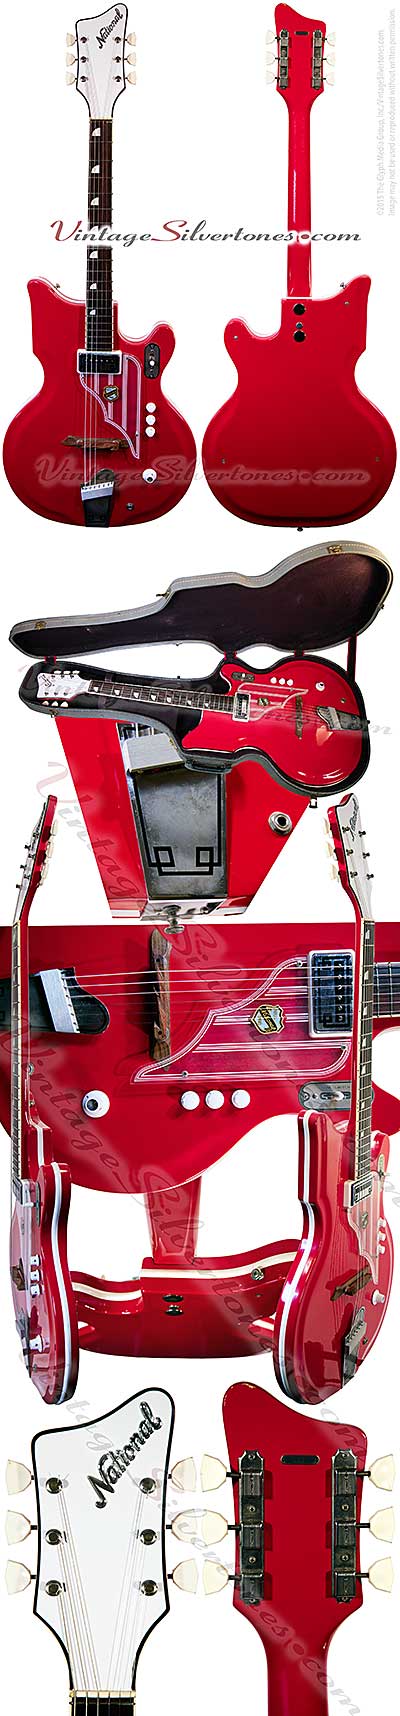 National Val-Pro 82 - semi-hollow body electric guitar 1 pickup, made in Chicago 1962 res-o-glass